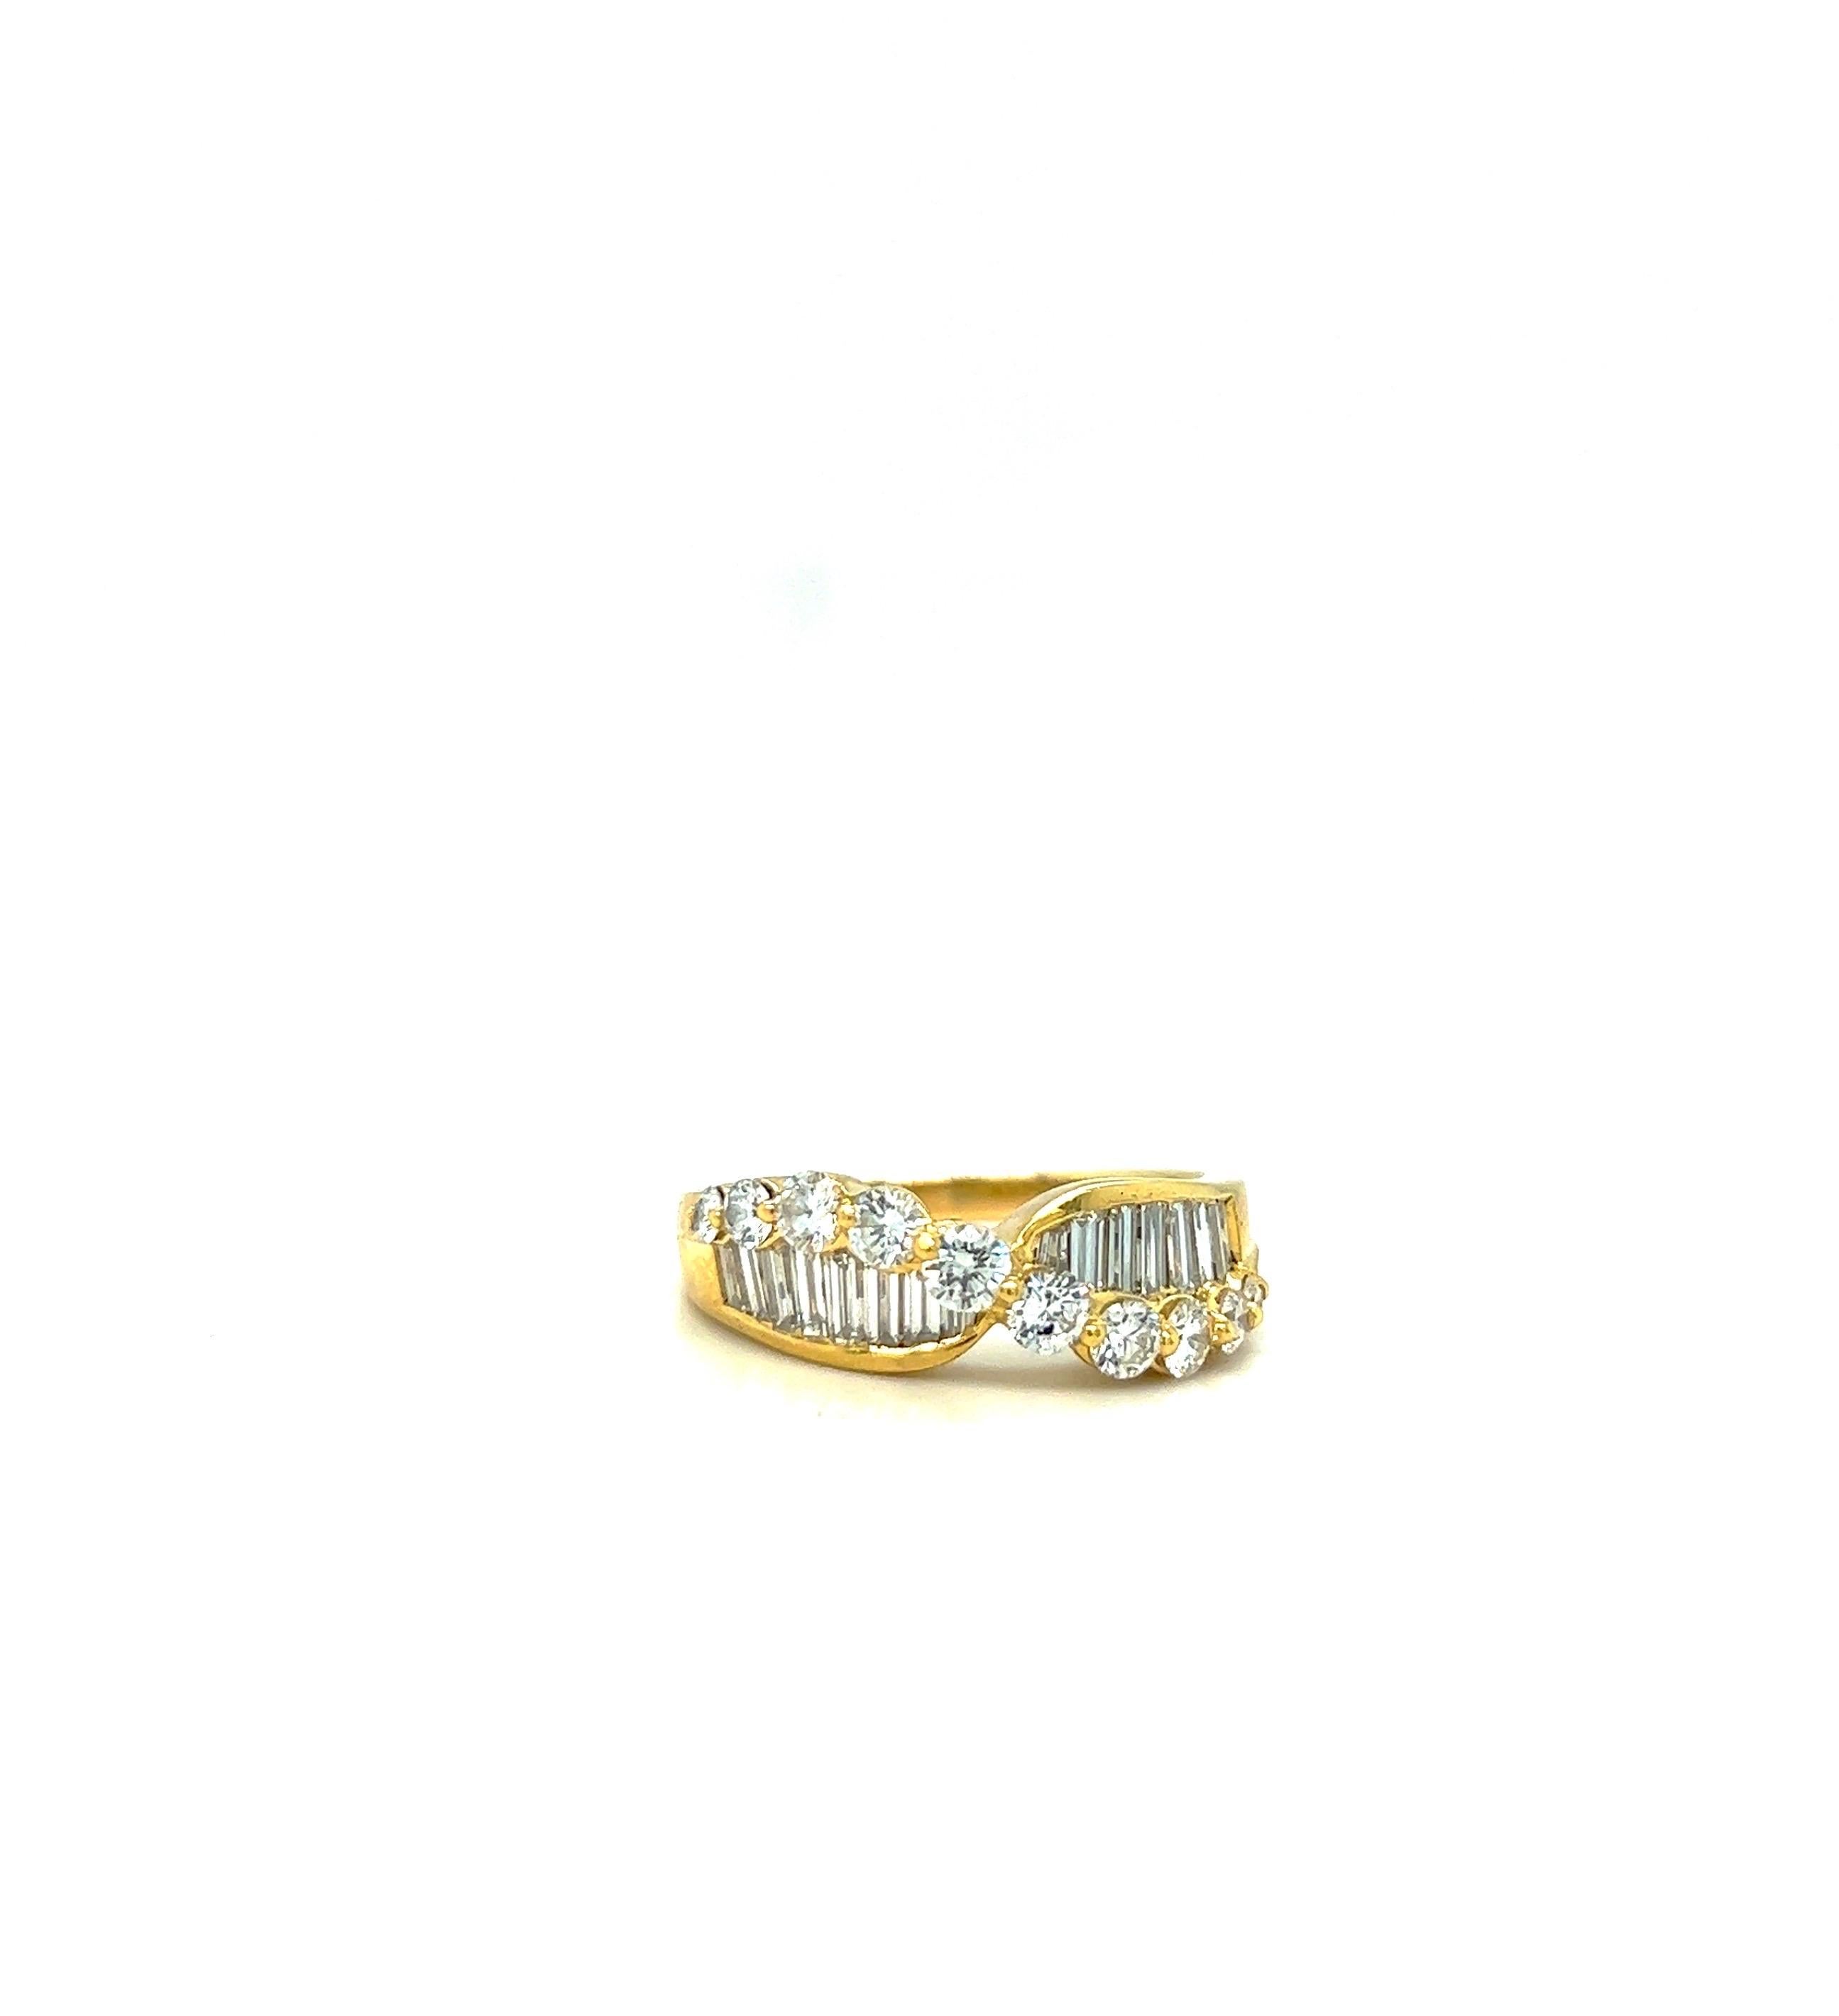 Beautiful 18 karat yellow gold ring set with baguette and round diamonds. The baguette diamonds are set vertically ,as the round brilliant prong set diamonds gracefully curve across from east to west. There is a round diamond set in a triangular